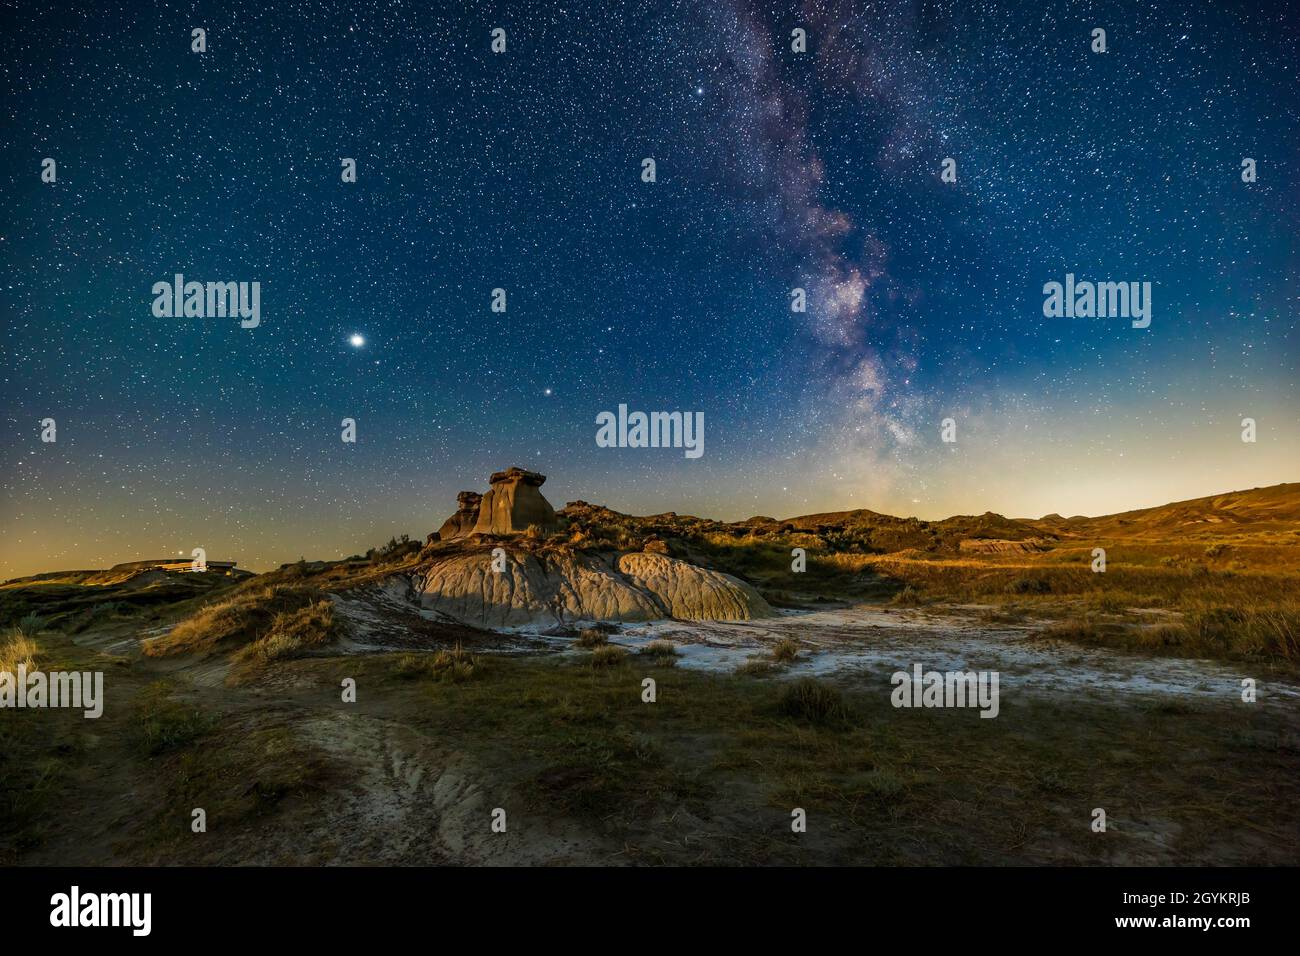 The summer Milky Way in the southwest with the planets Jupiter (brightest) and Saturn (centre) to the east, over the Badlands formations at the Trail Stock Photo